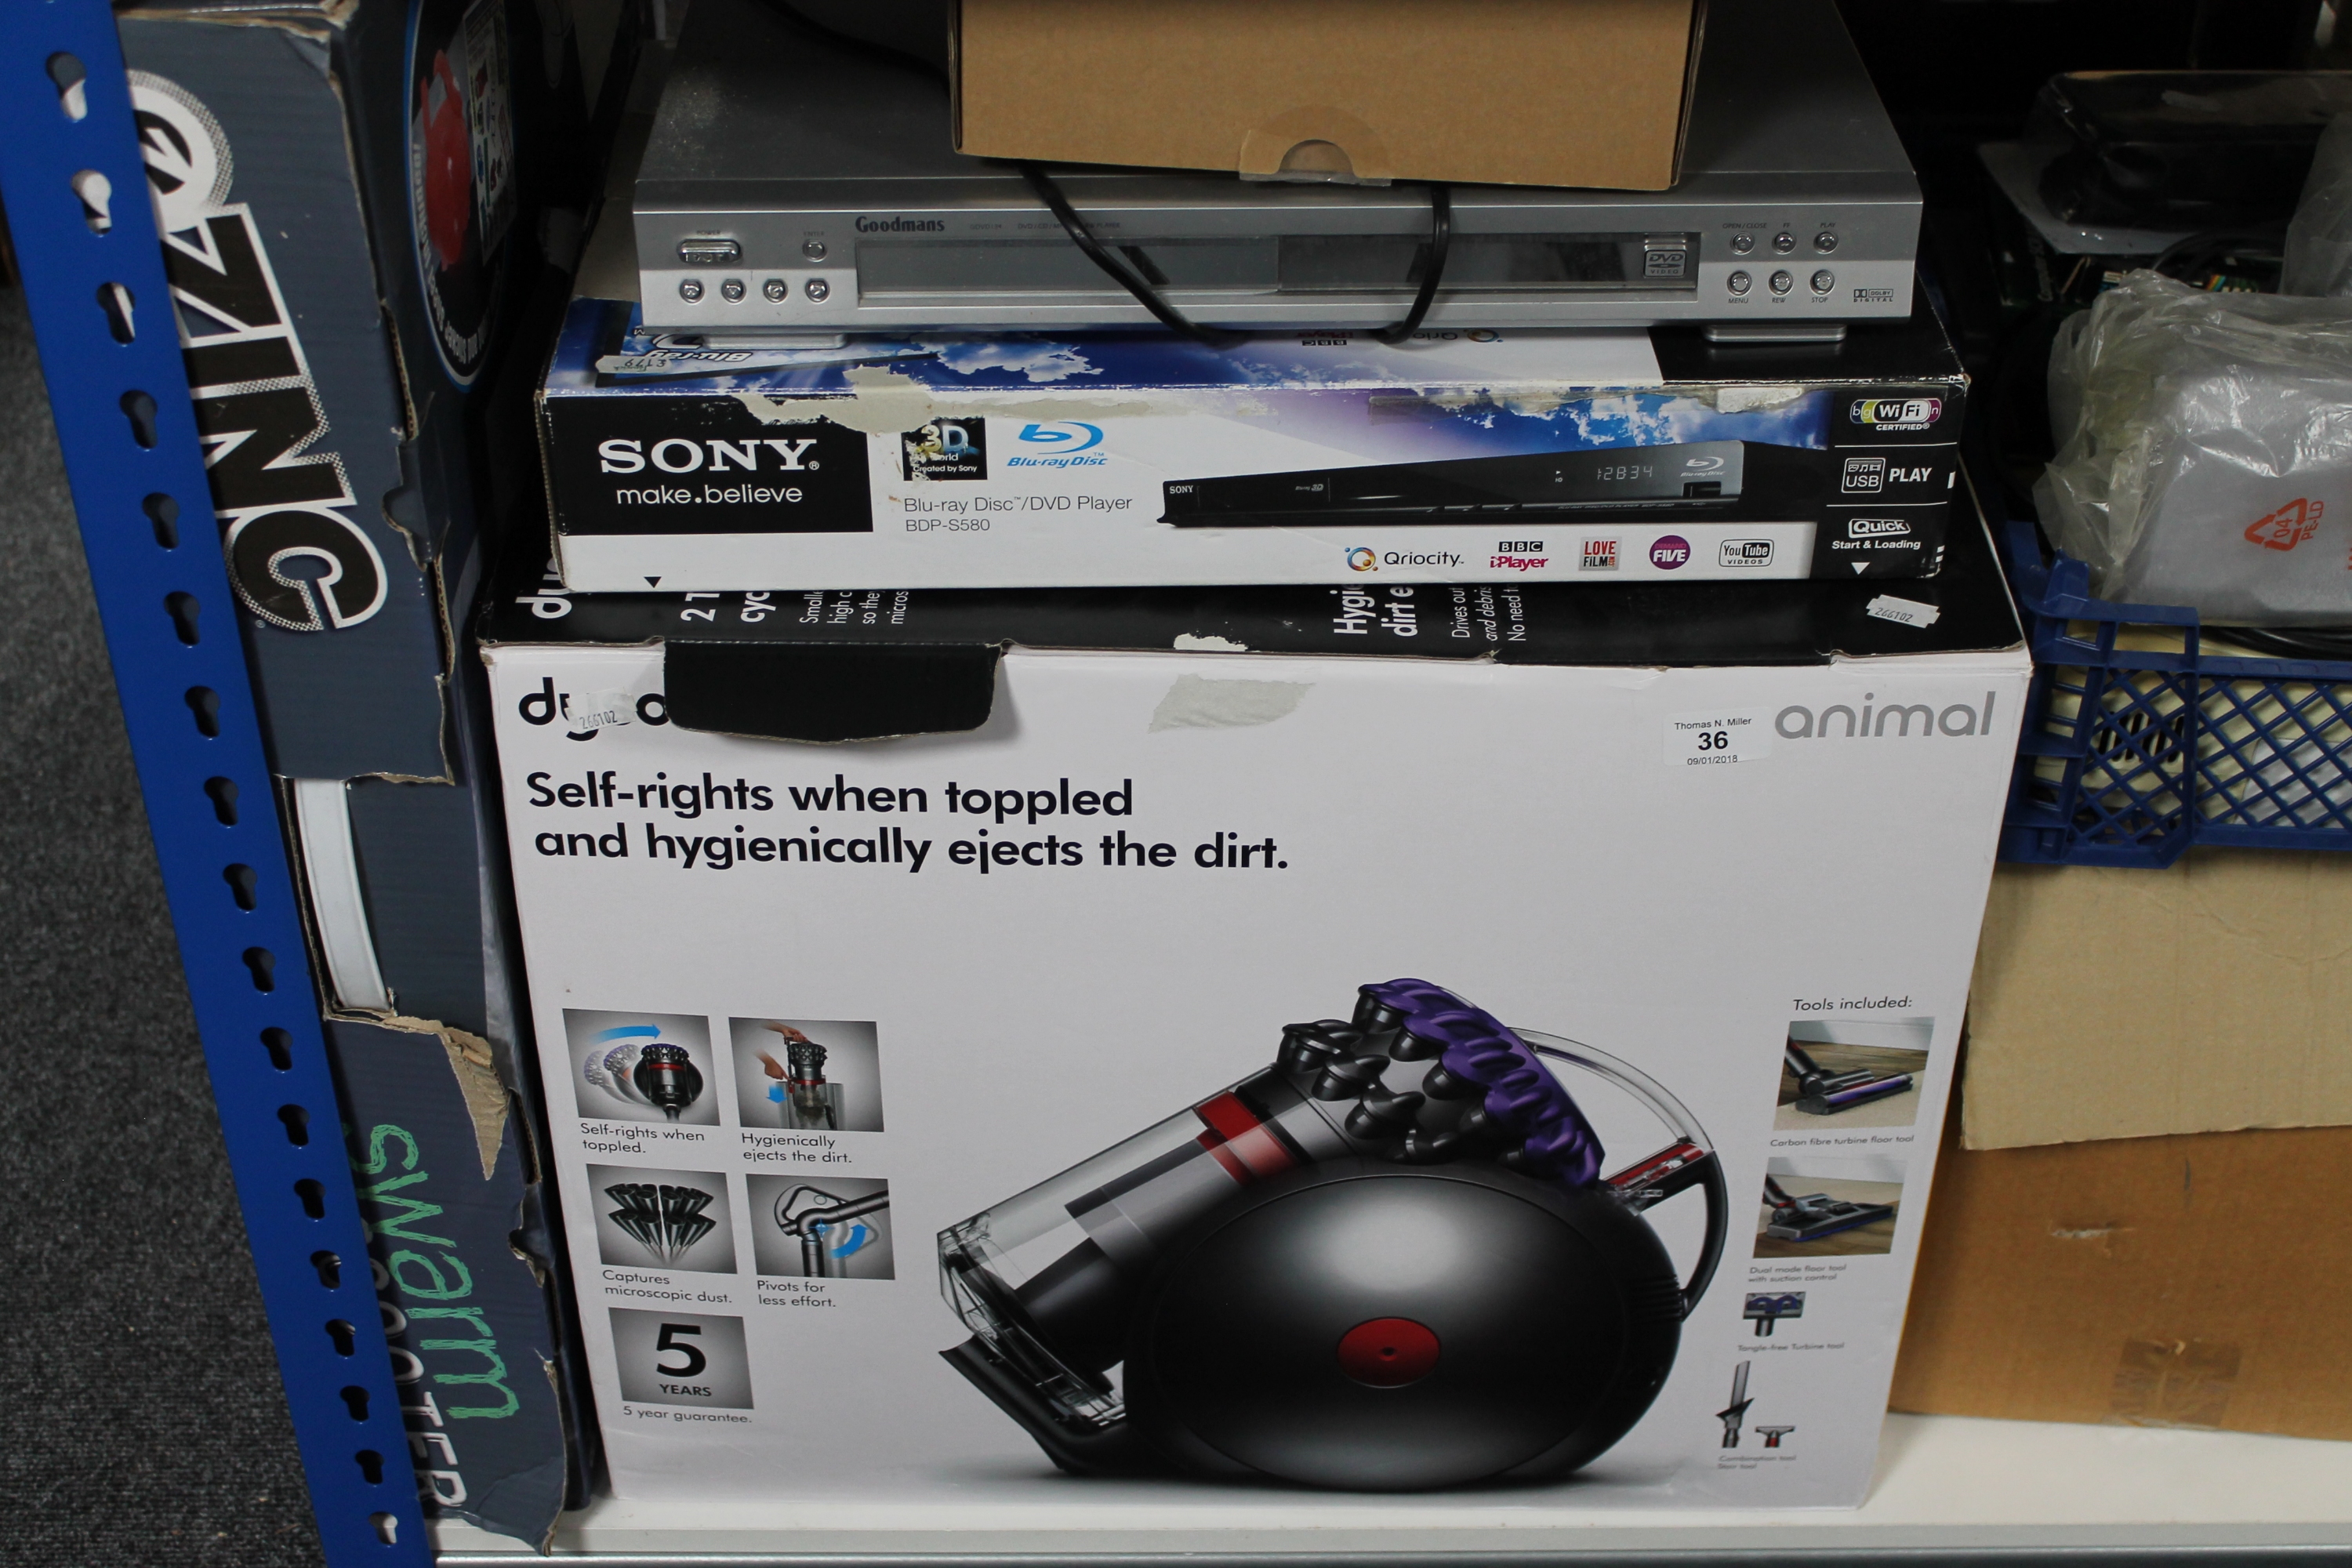 A Dyson Vac together with a Goodmans dvd player,